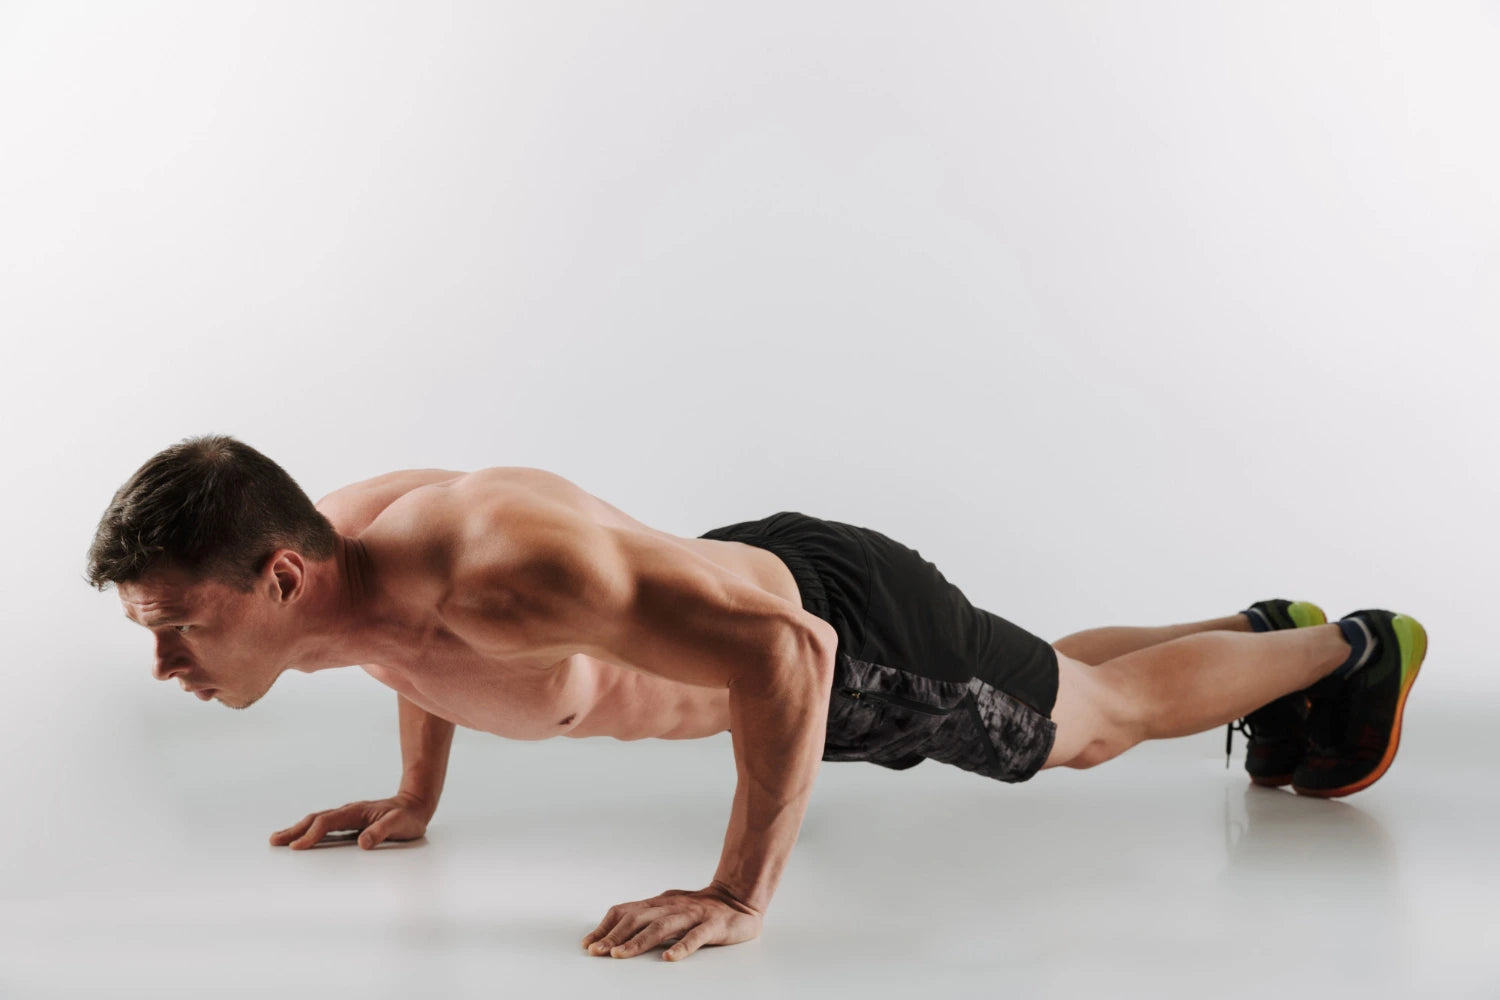 A young man doing a pushup